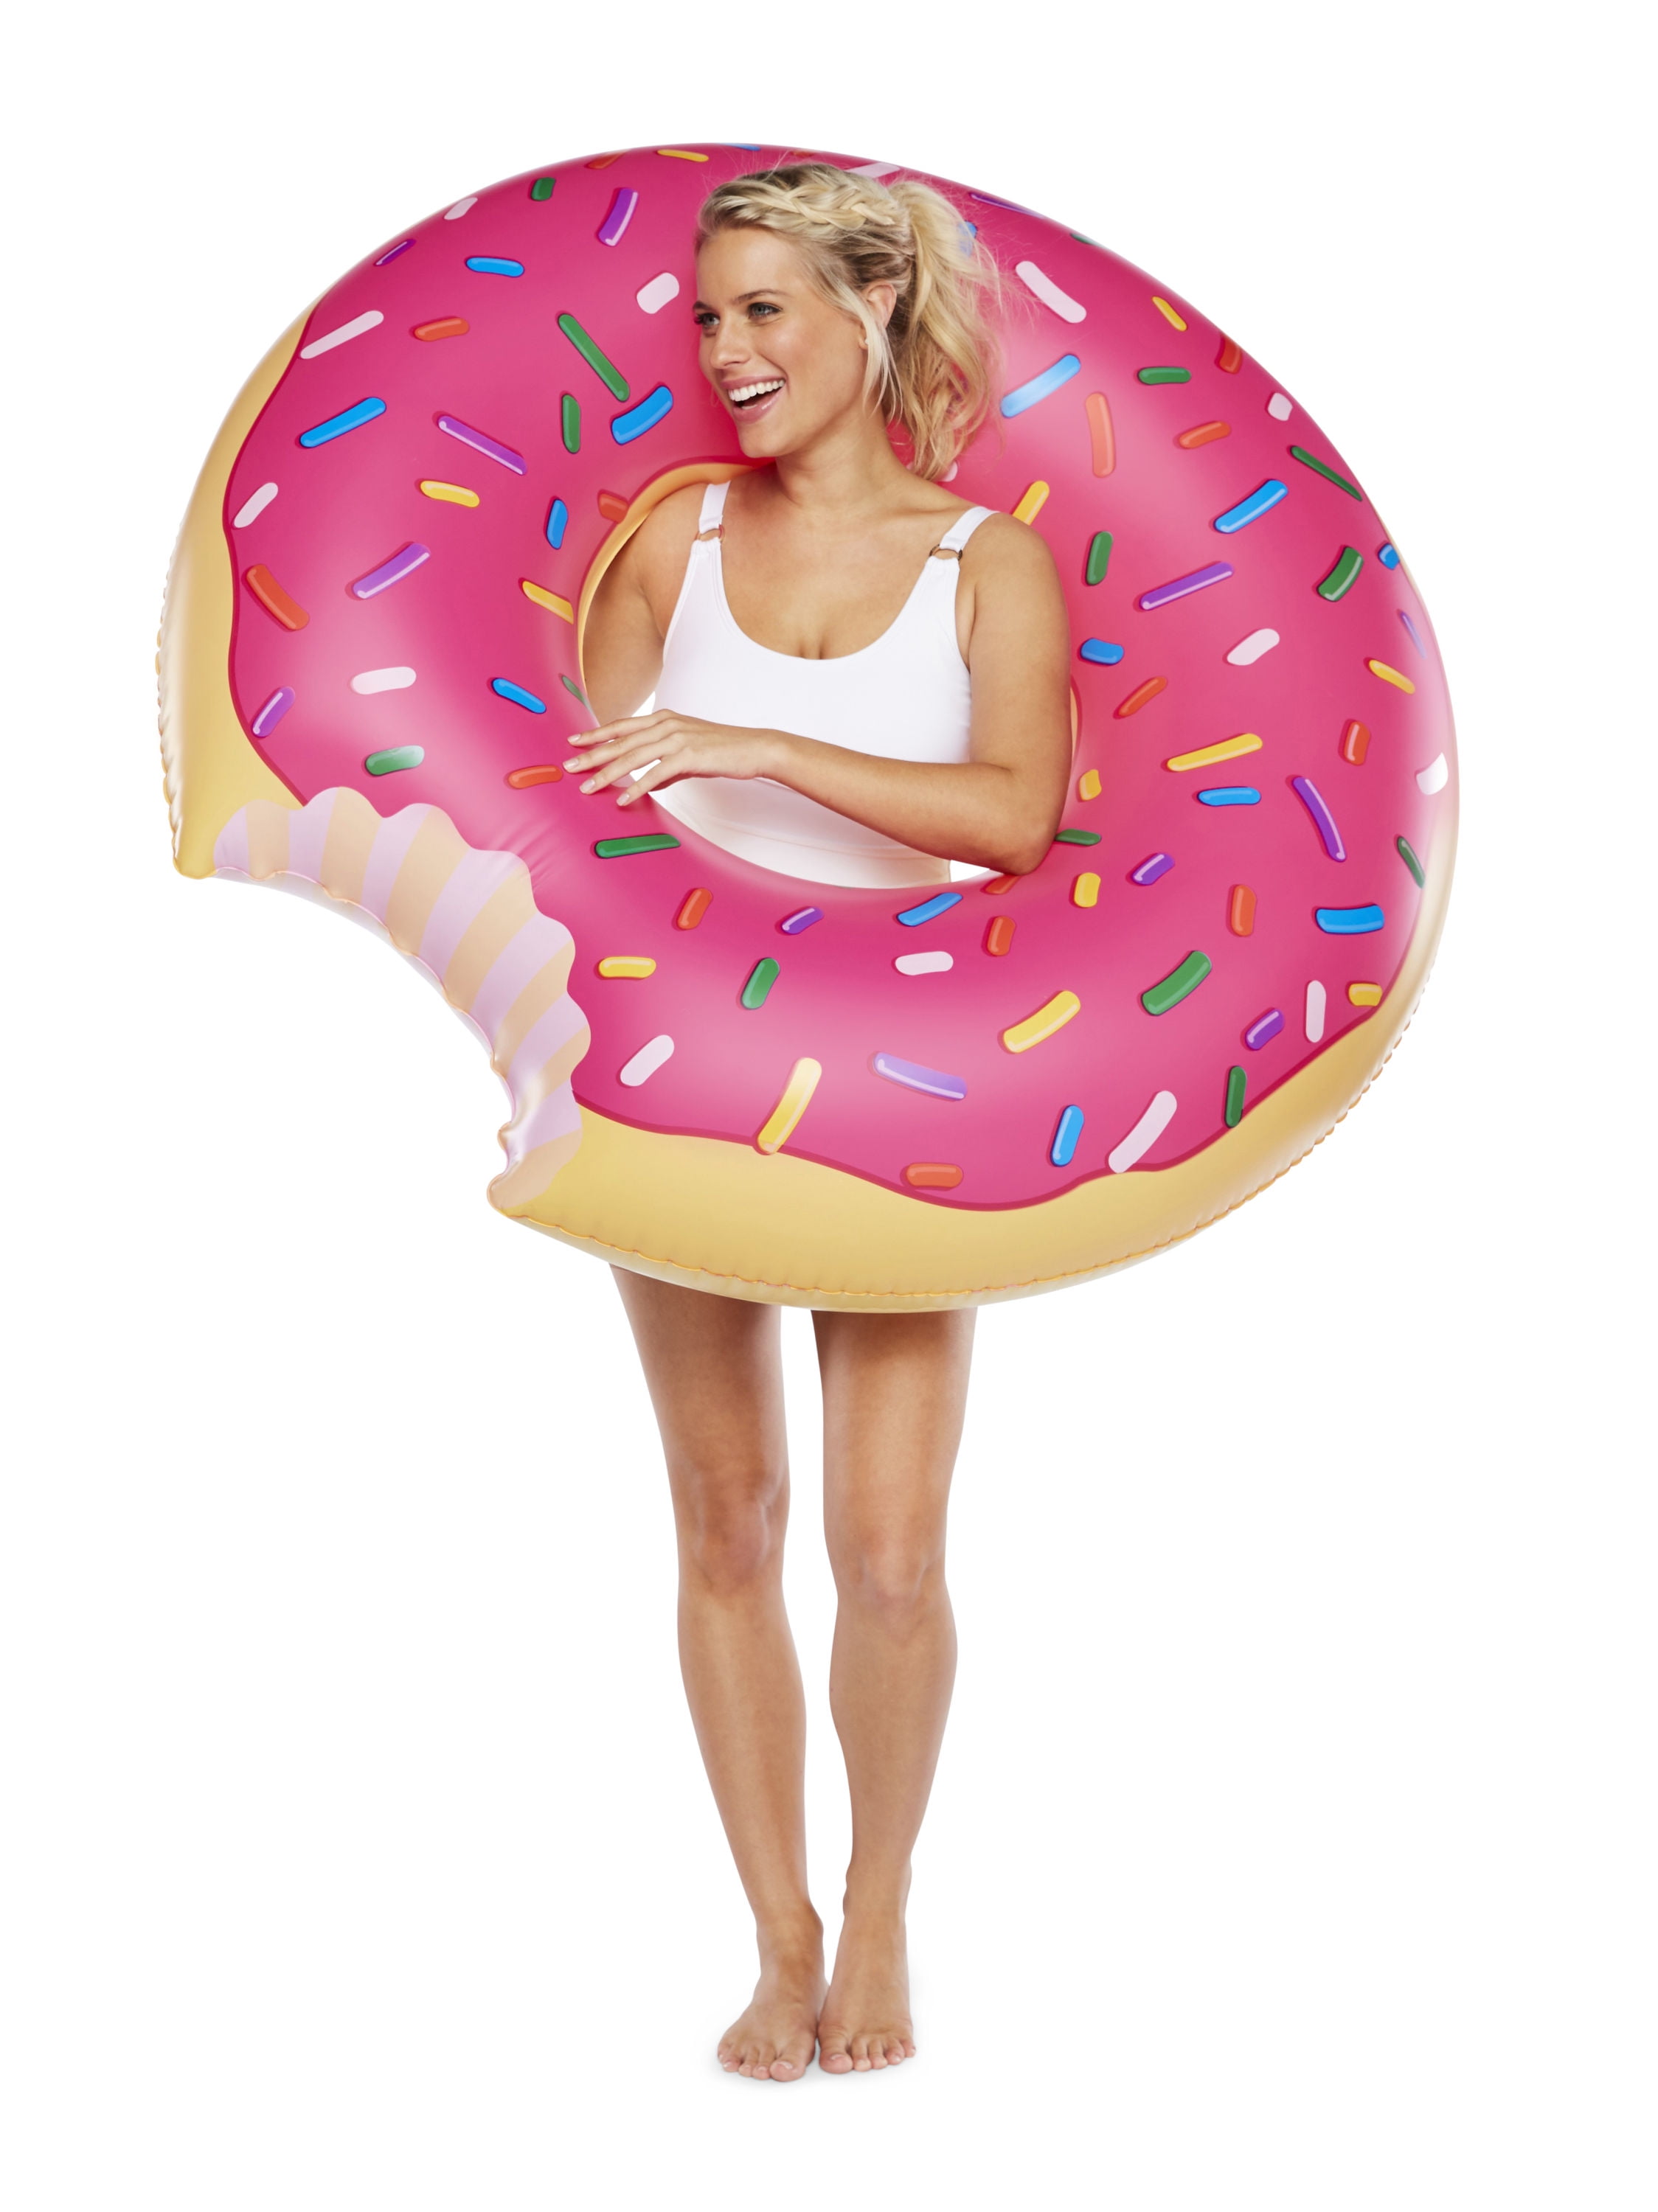 Big Mouth Pink Donut Lil Float Pool Vacation Float Kids Ages 1-3 up to 45 pounds 